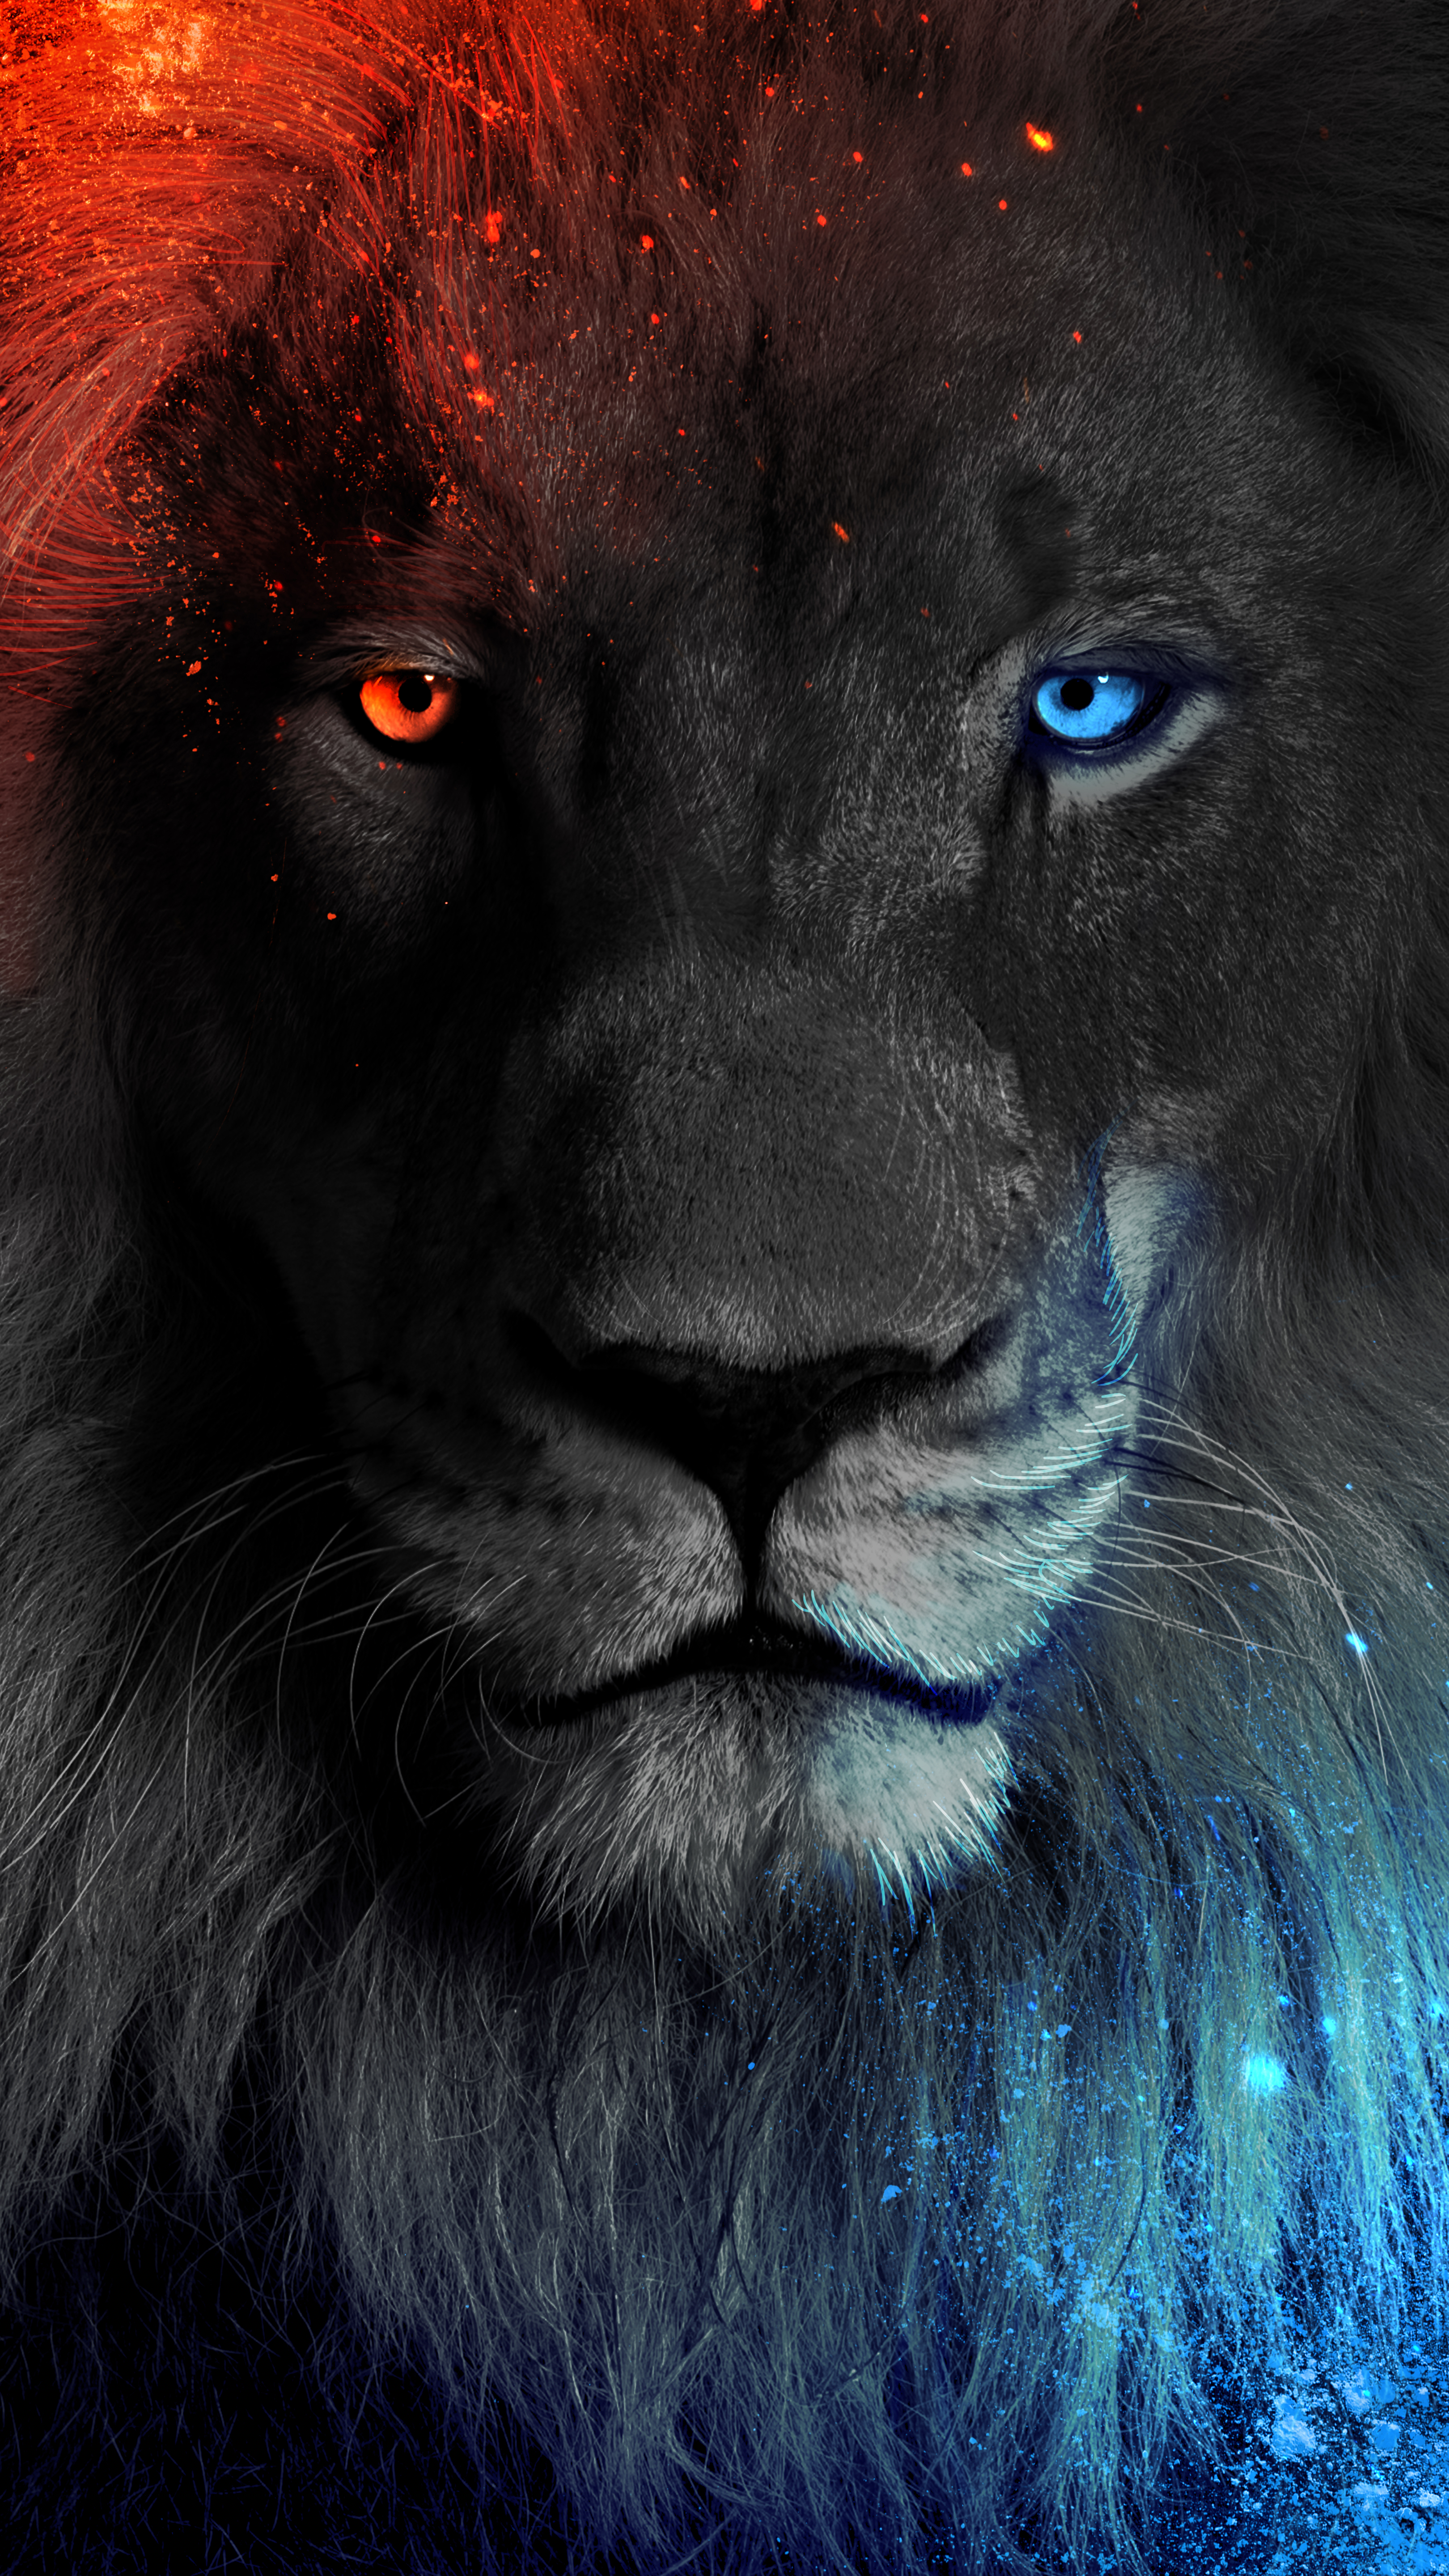 Lion Wallpapers, HD Lion Backgrounds, Free Images Download